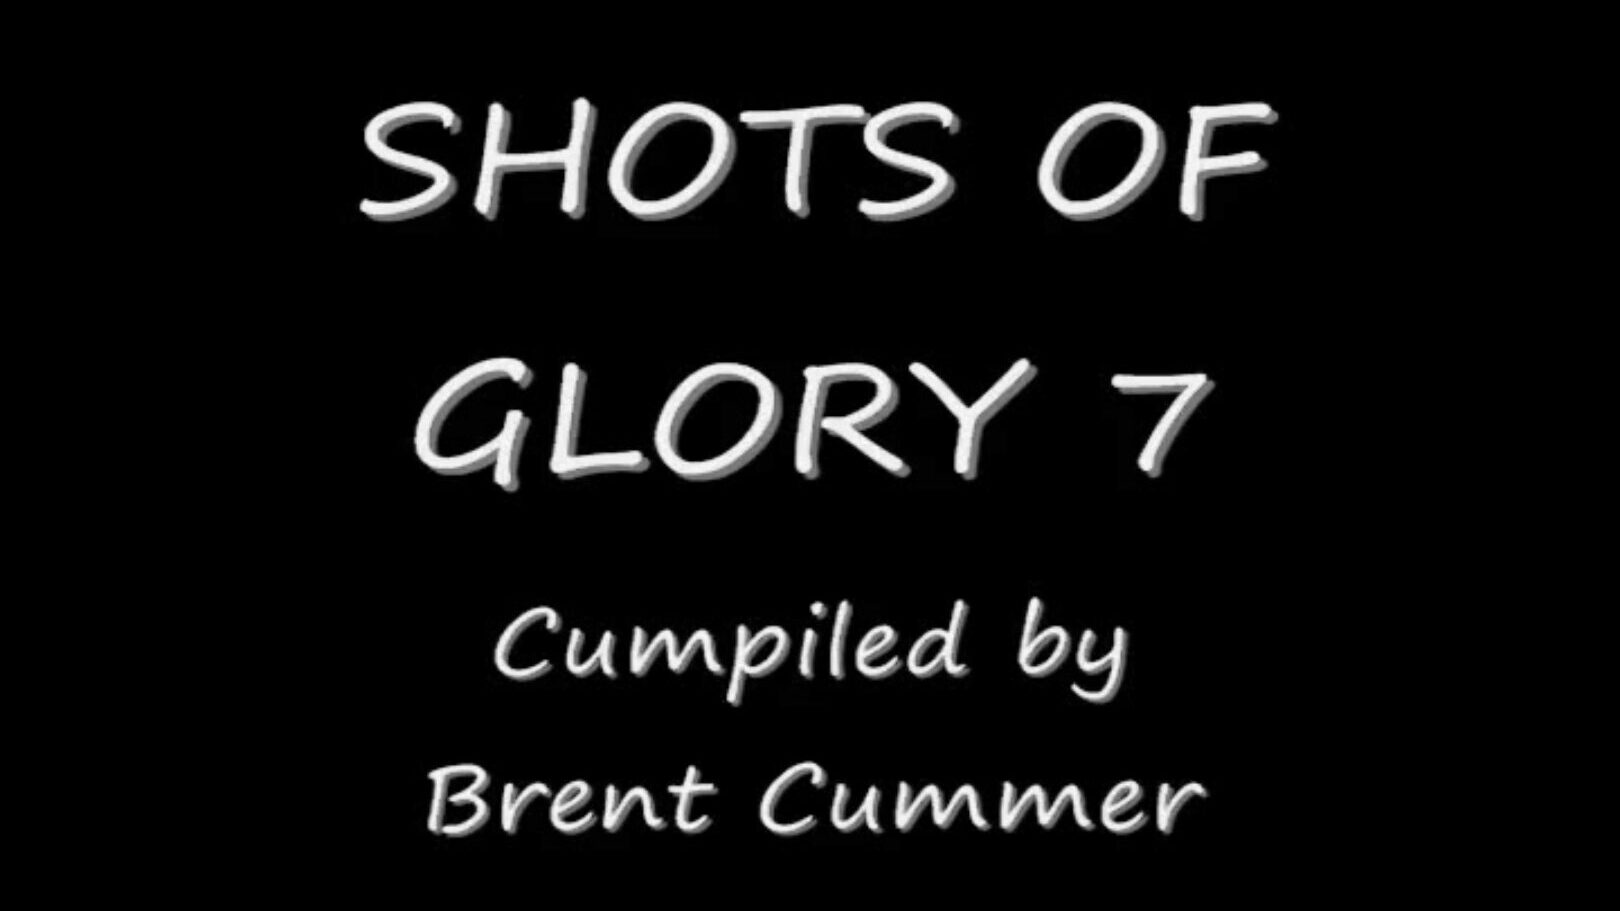 Shots of Glory 7 Another naughty cumpilation cumpiled by Brent Cummer. A bunch of precious slow motility truckloads of spunk going into these doxies mouths Its always wonderful crap to see